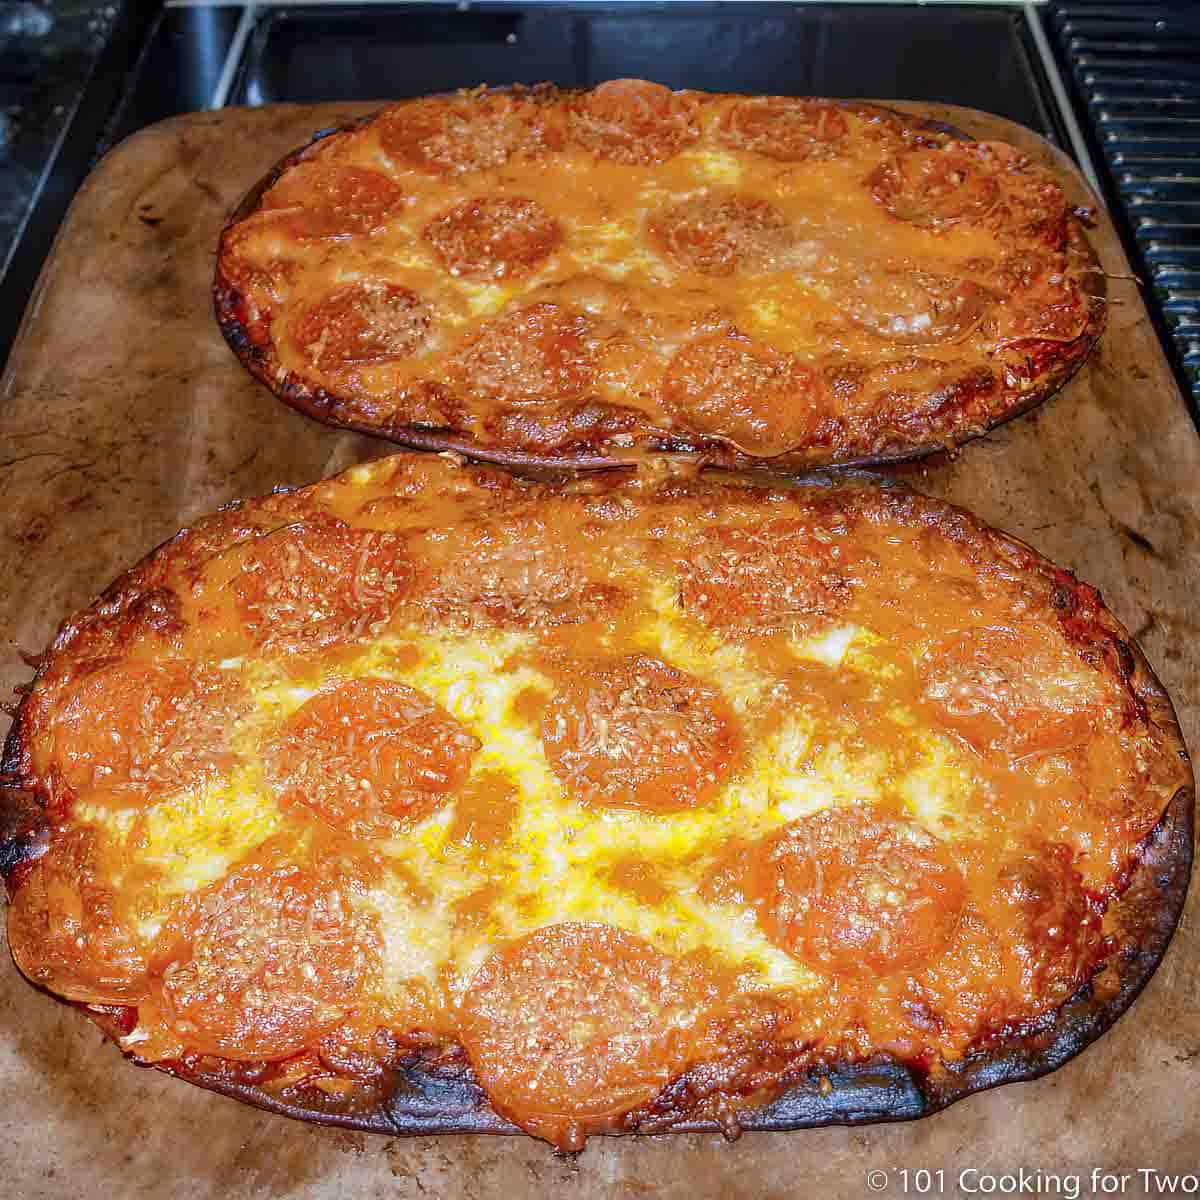 Two cooked flat bread pizzas on a stone